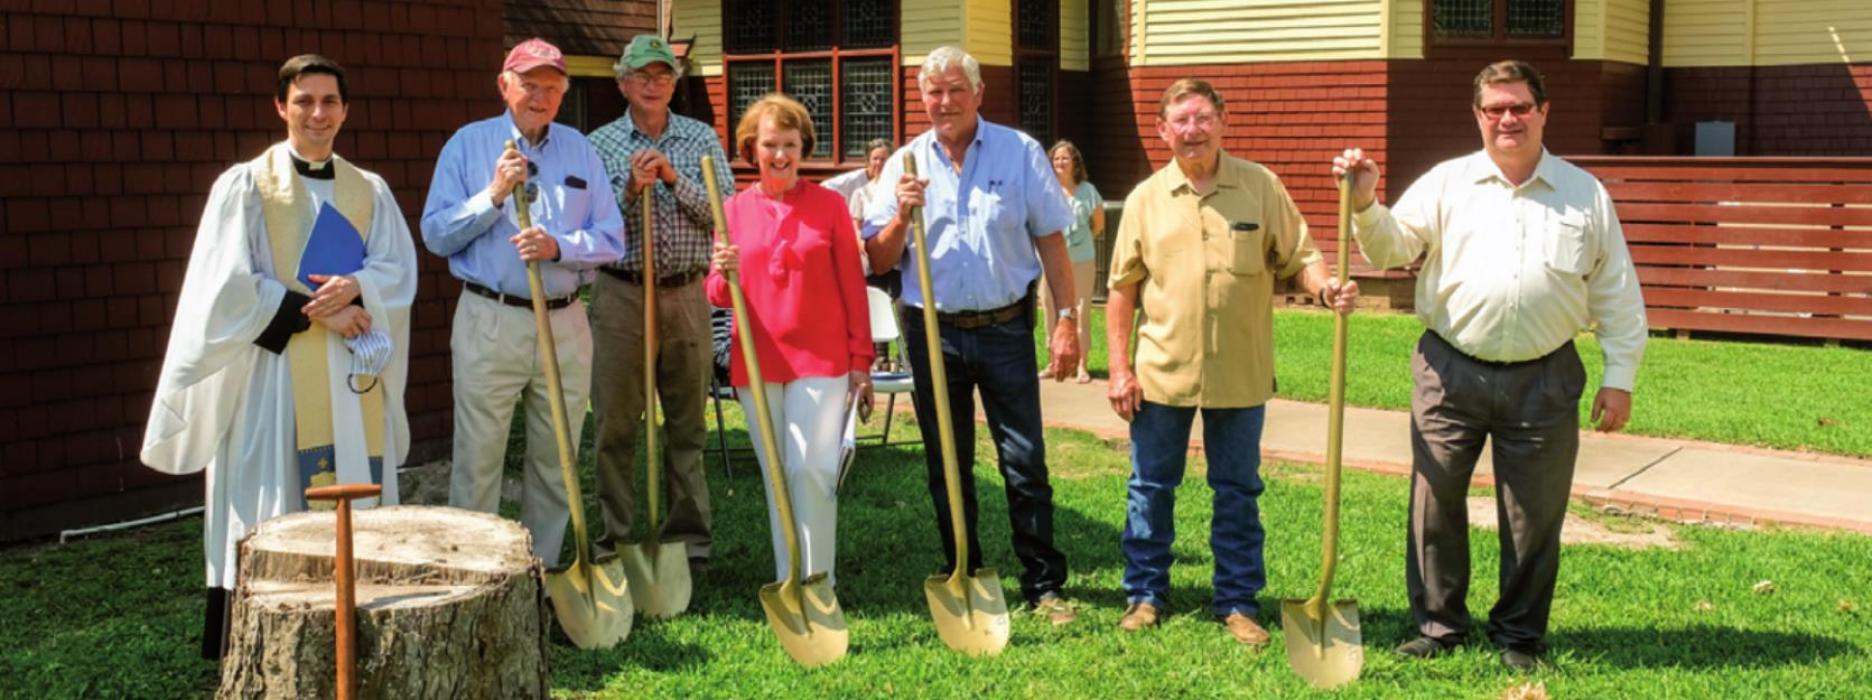 Members of the St. James Episcopal Church Construction Committee: (from left) Fr. Eric Hungerford, Mel Glasscock (chairman), James Cauble, Carol Helms, Joe Gaeke of Gaeke Construction, Chuck Gibson and Joe Jameson. Photo by Andy Behlen